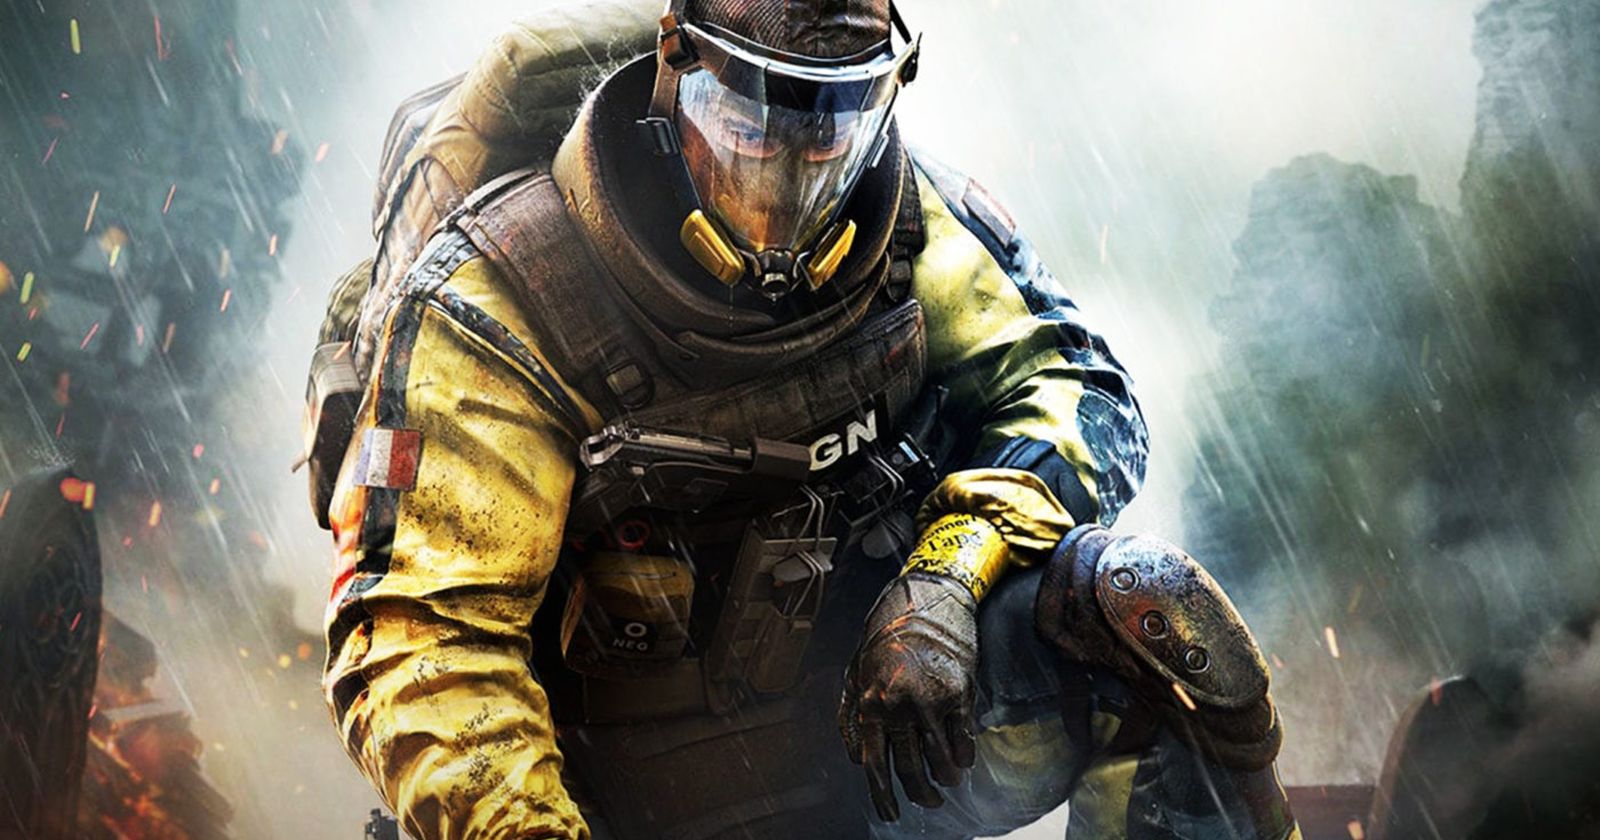 Rainbow Six Mobile Release Date - When is Rainbow Six Mobile coming out? —  SiegeGG